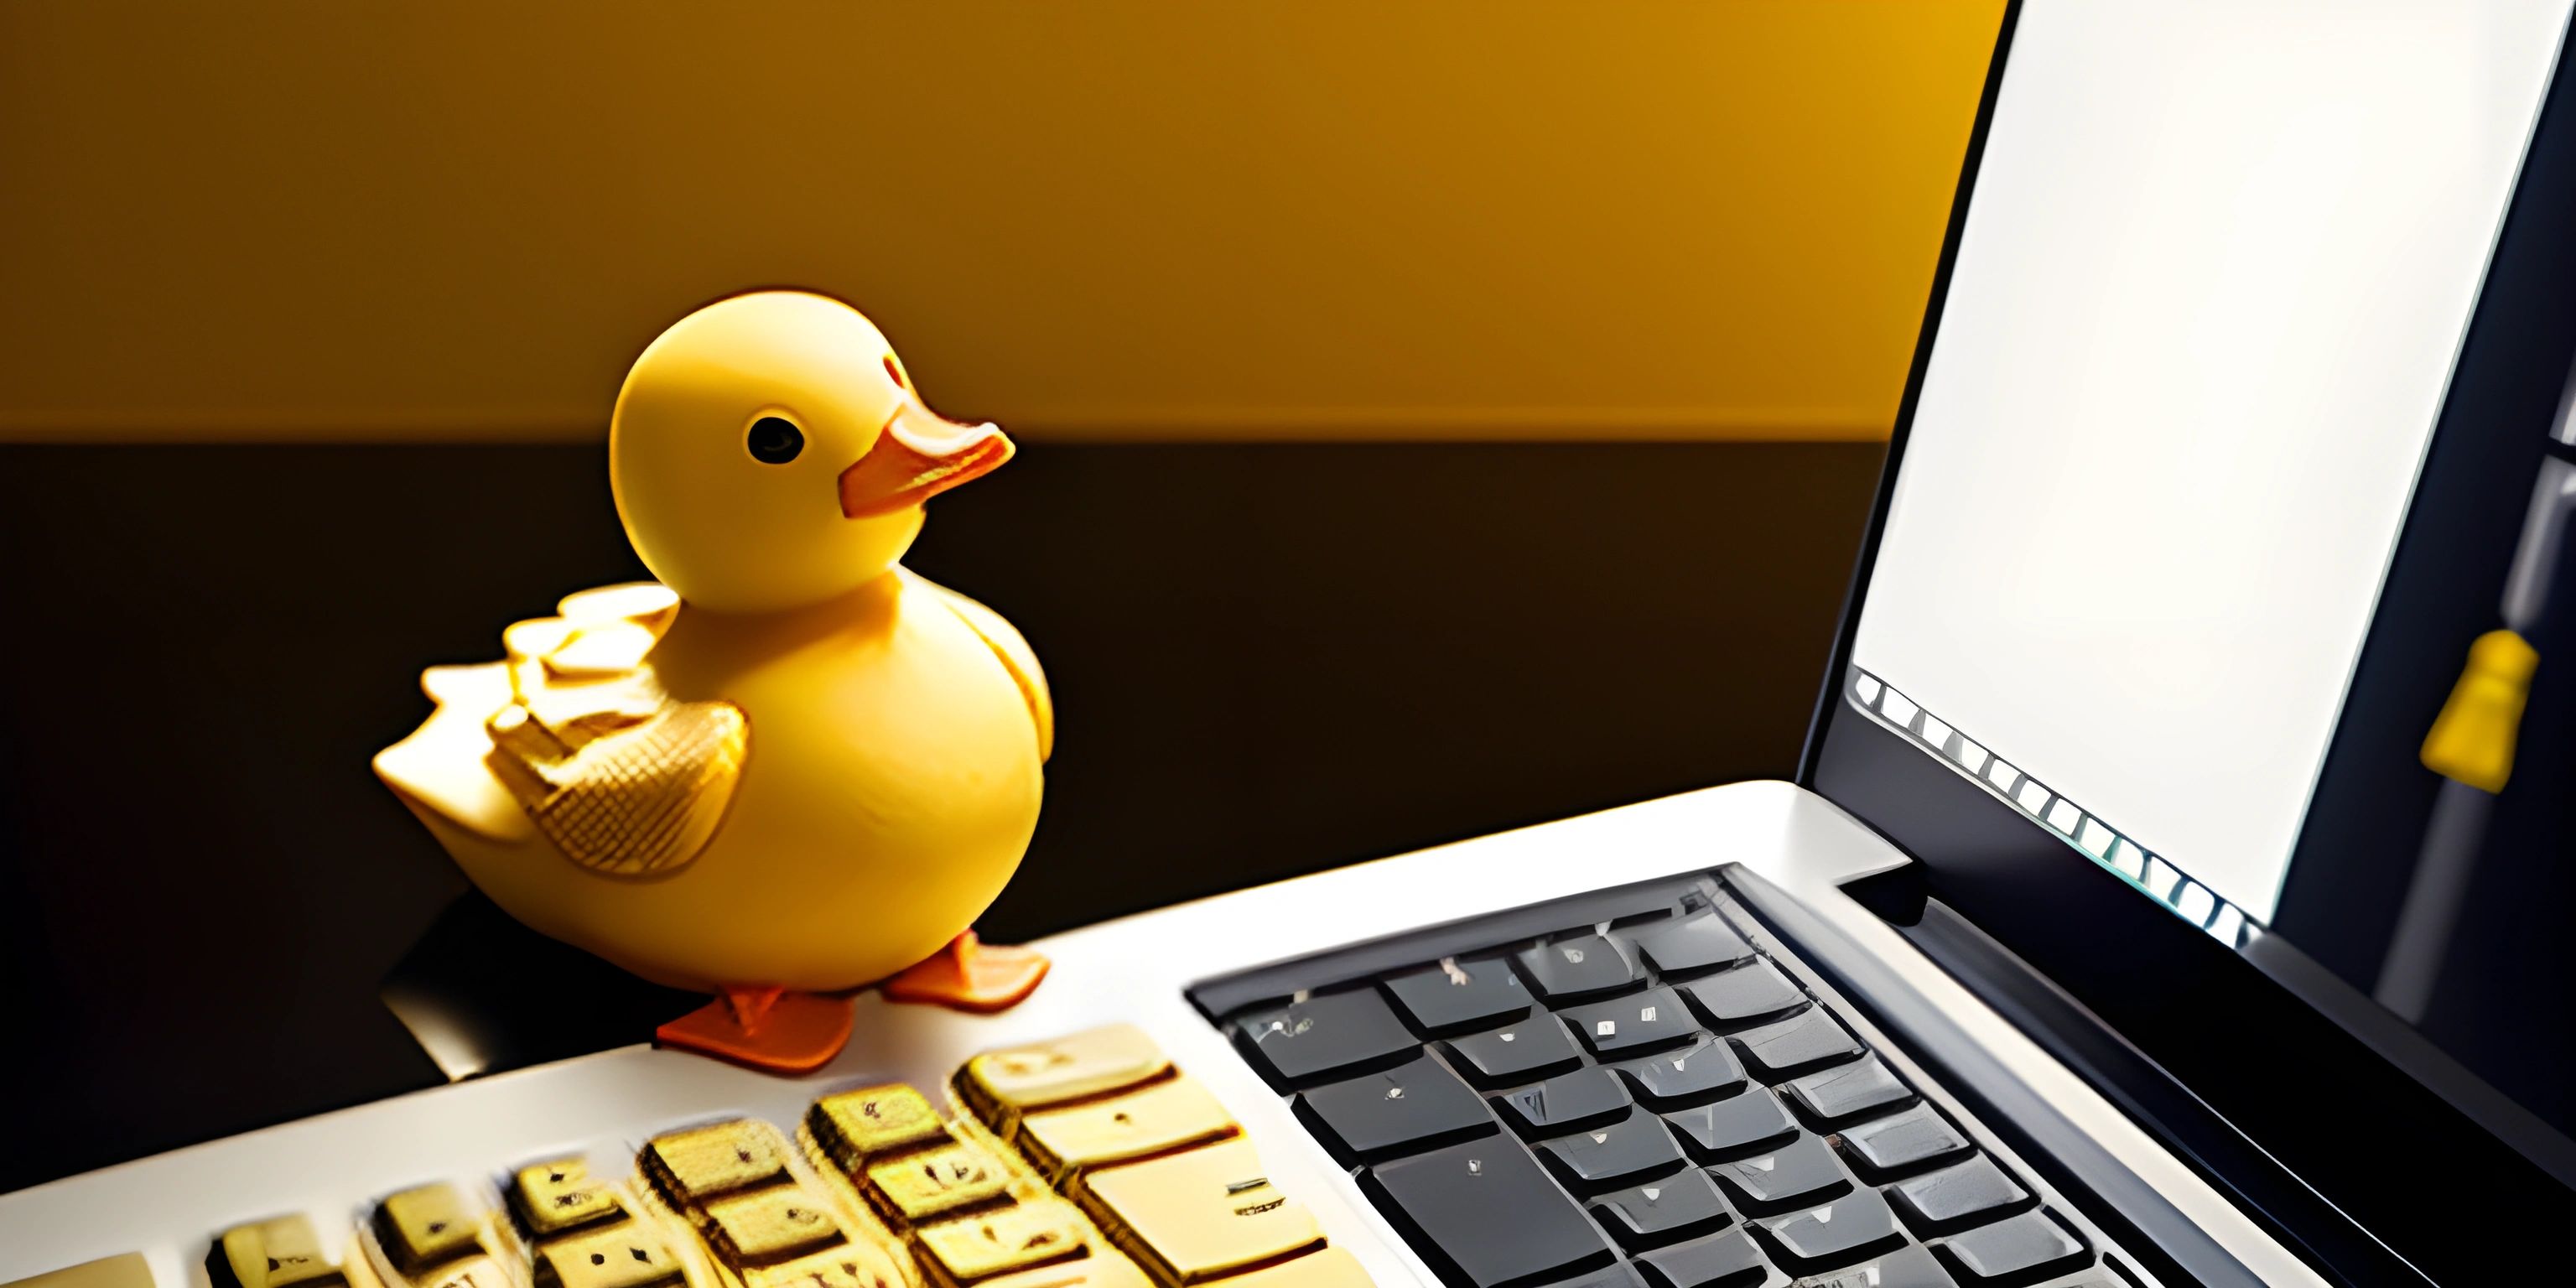 a yellow rubber duck sits next to a laptop keyboard and the computer keyboard is covered in wood blocks